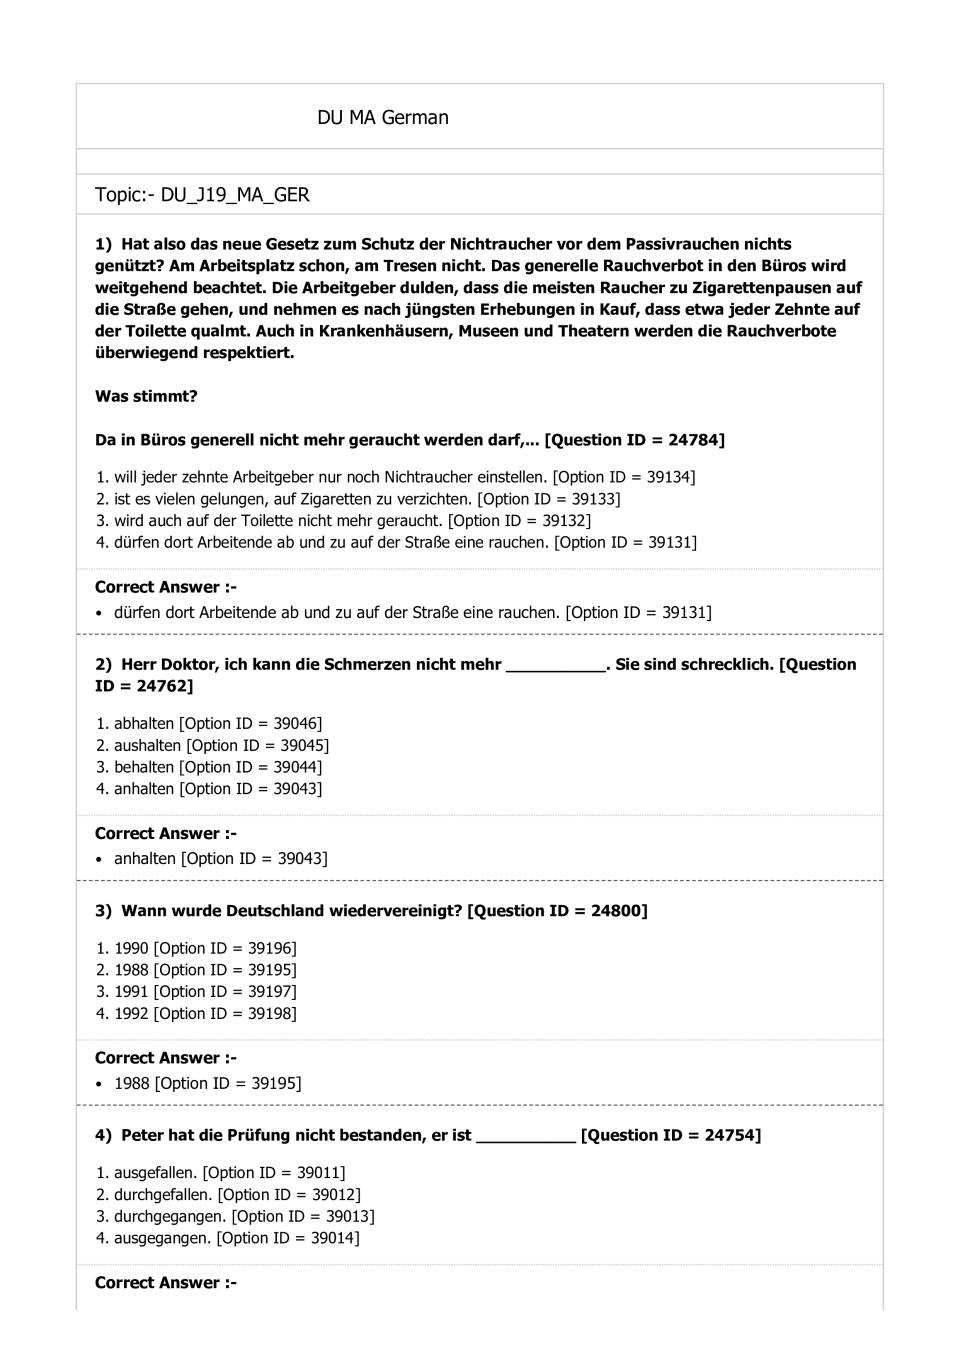 DUET Question Paper 2019 for MA German - Page 1